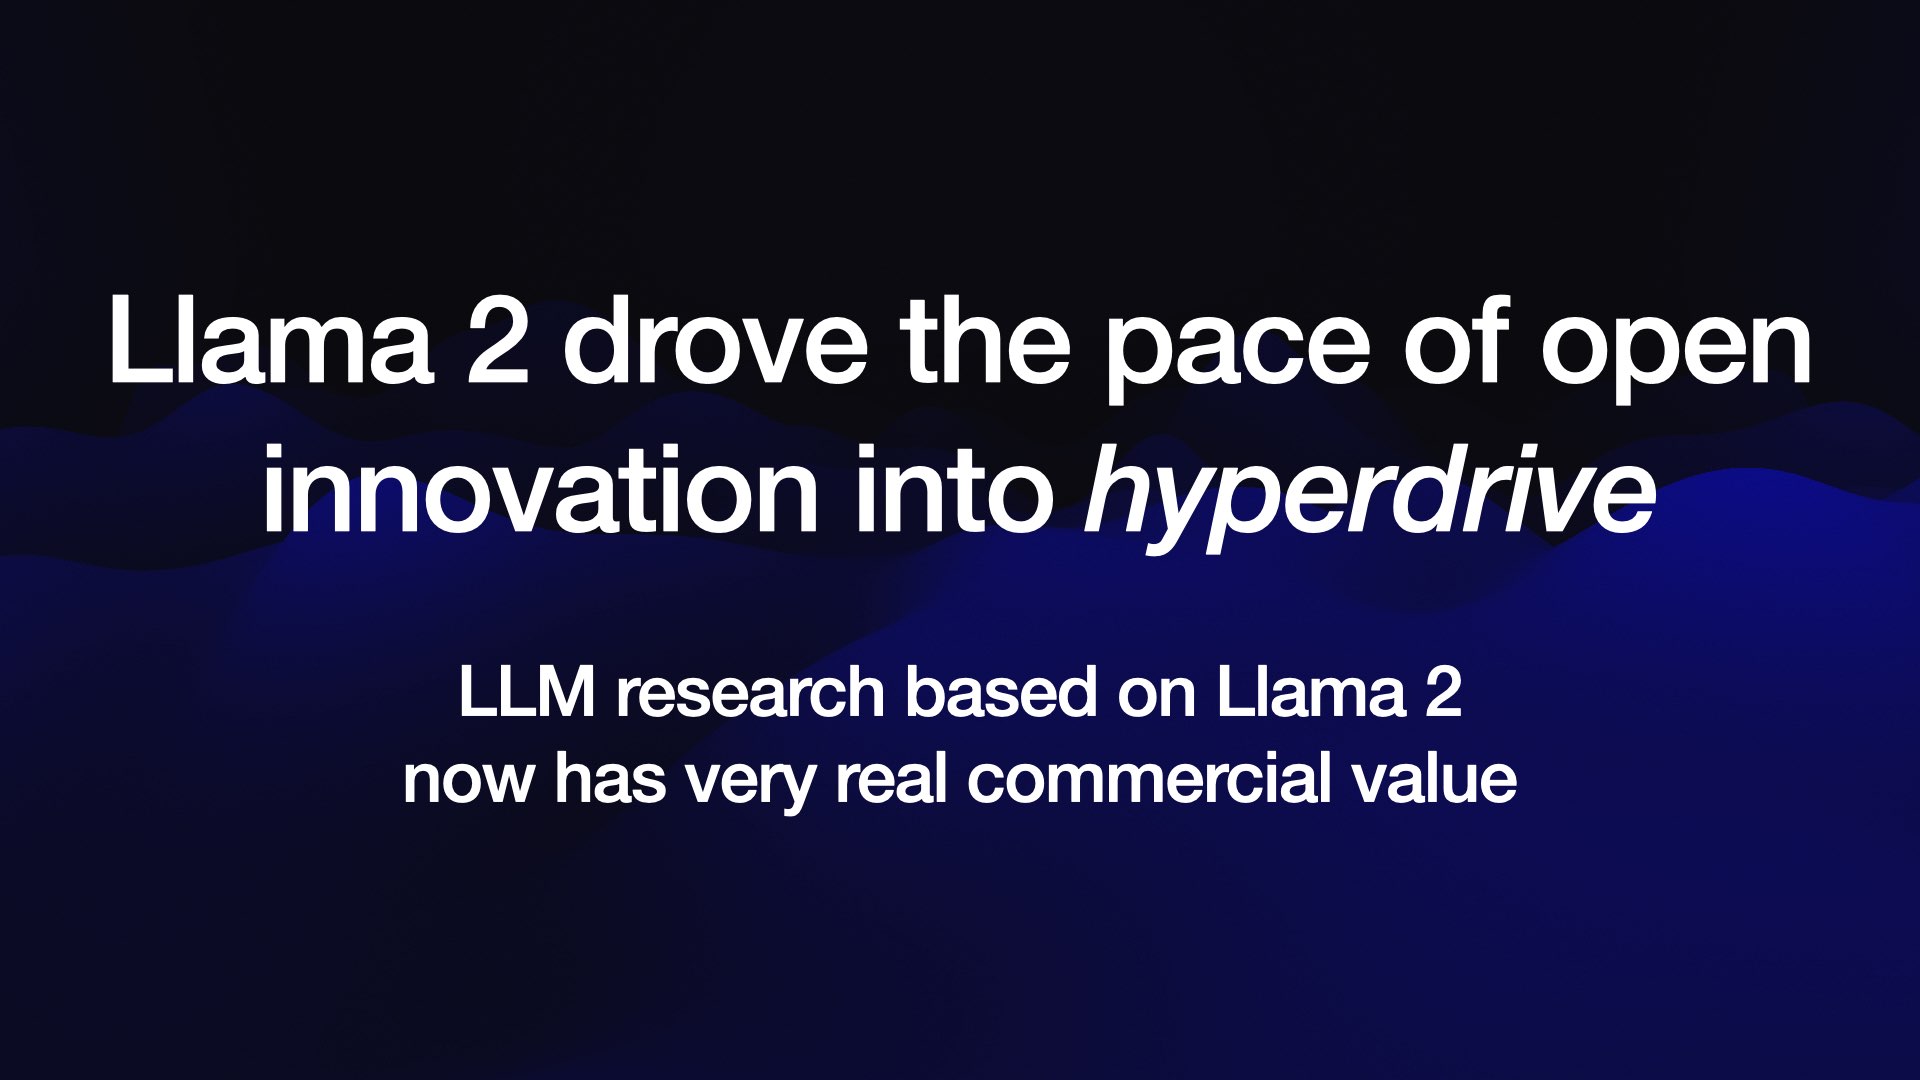 Llama 2 drove the pace of open innovation into hyperdrive  LLM research based on Llama 2 now has very real commercial value 